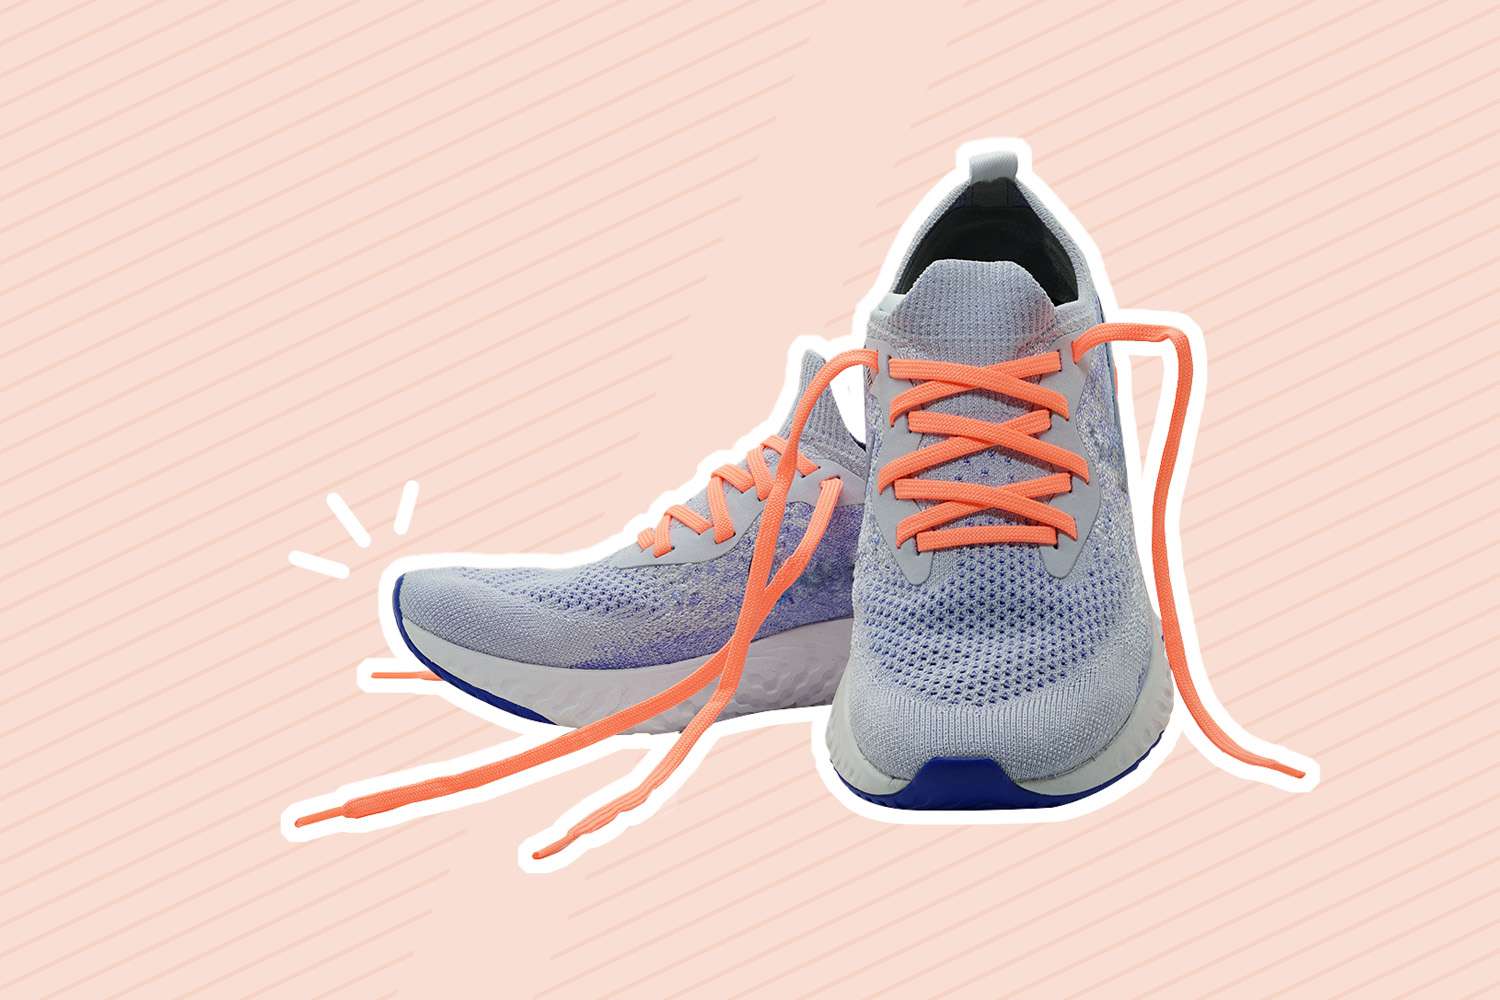 A pair of running shoes on an orange background